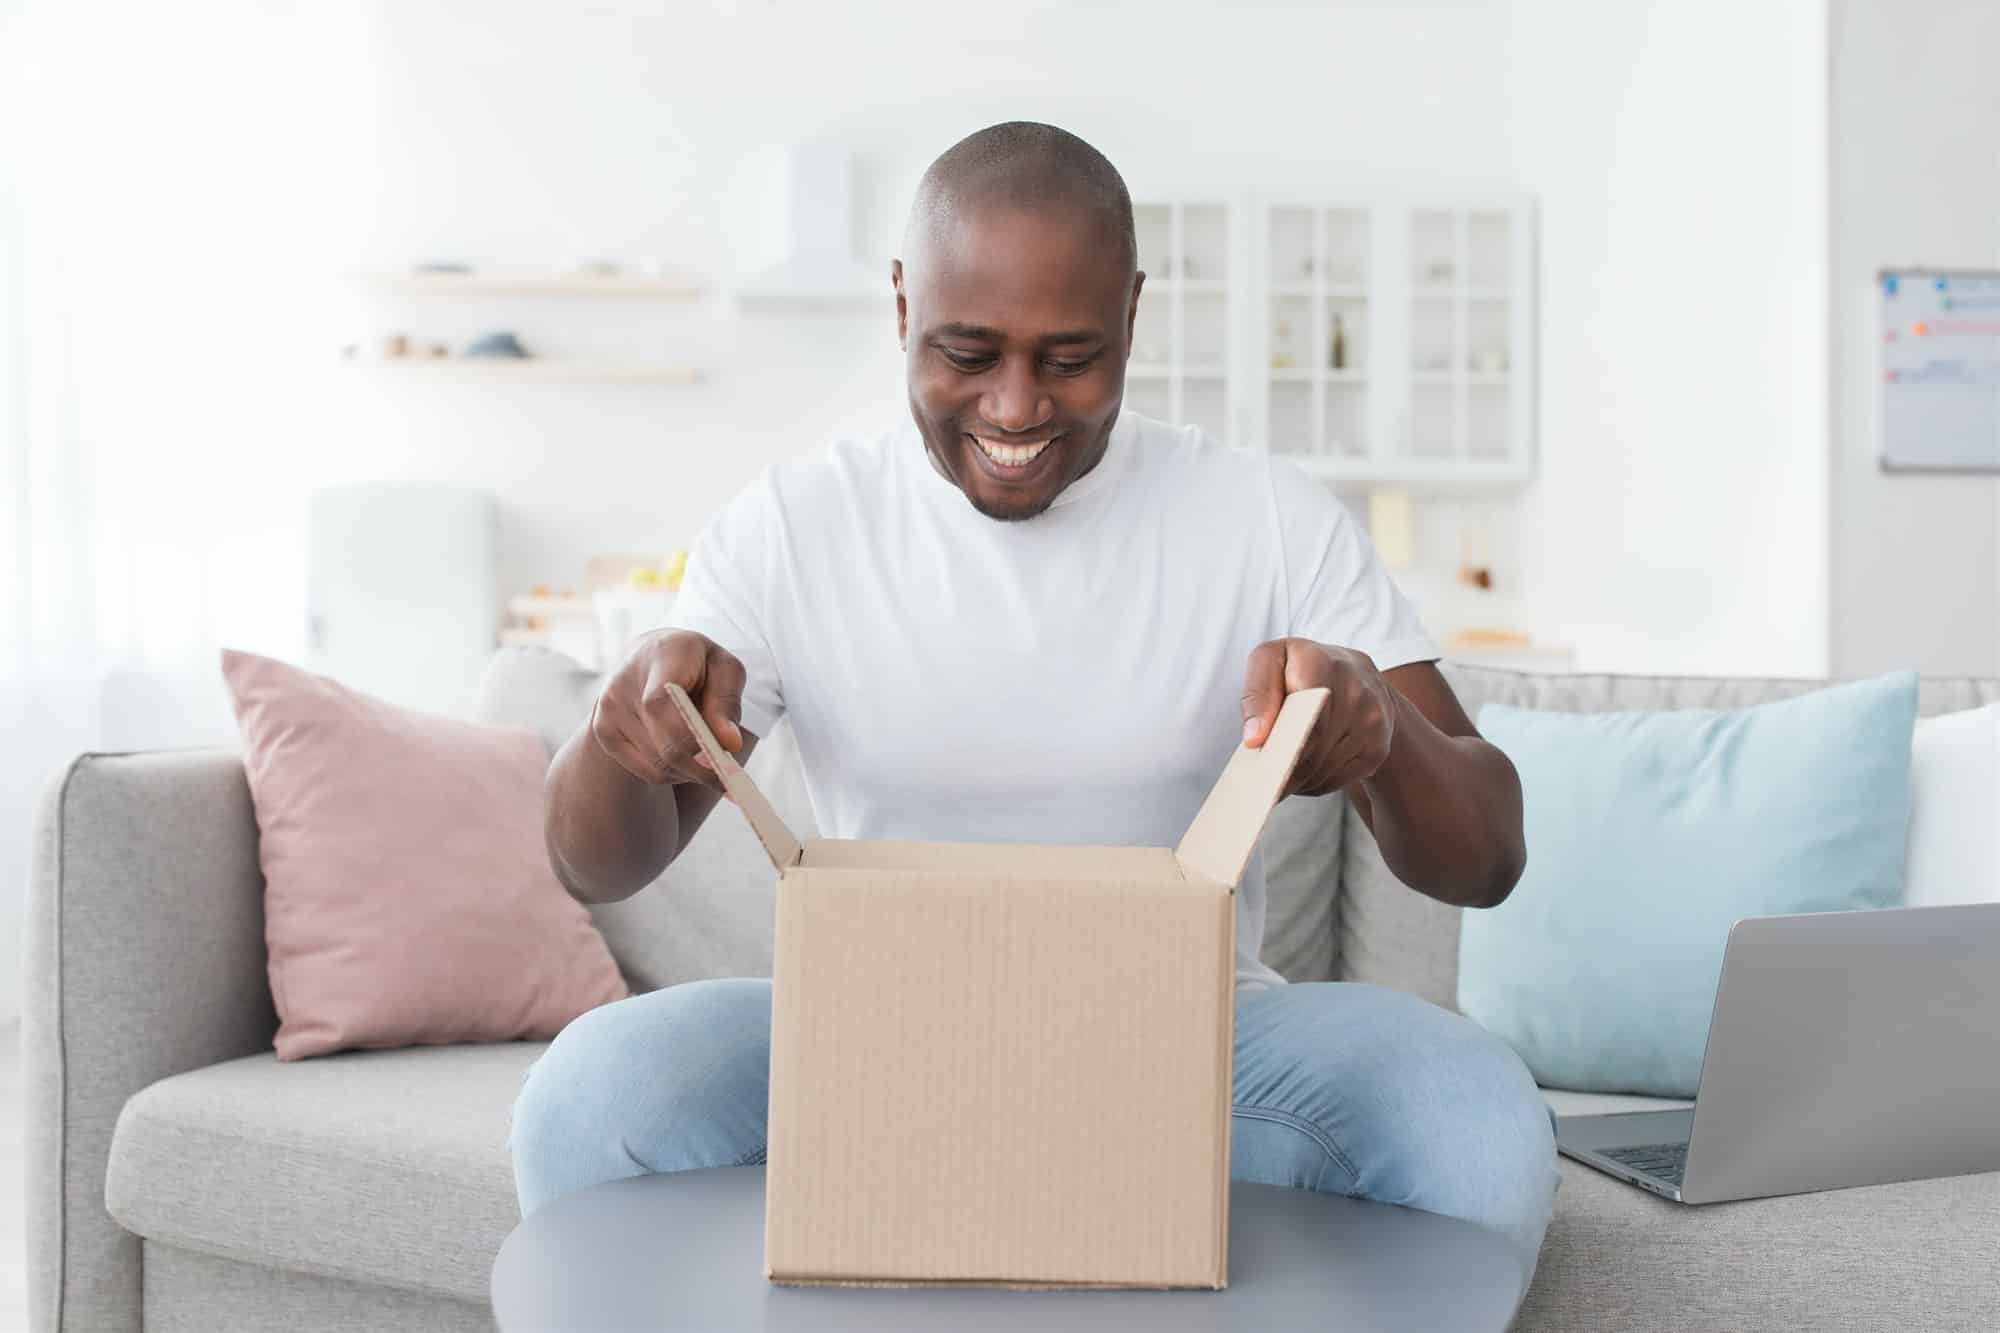 Happy black man unpacking delivery box, sitting on couch at home interior. Satisfied customer